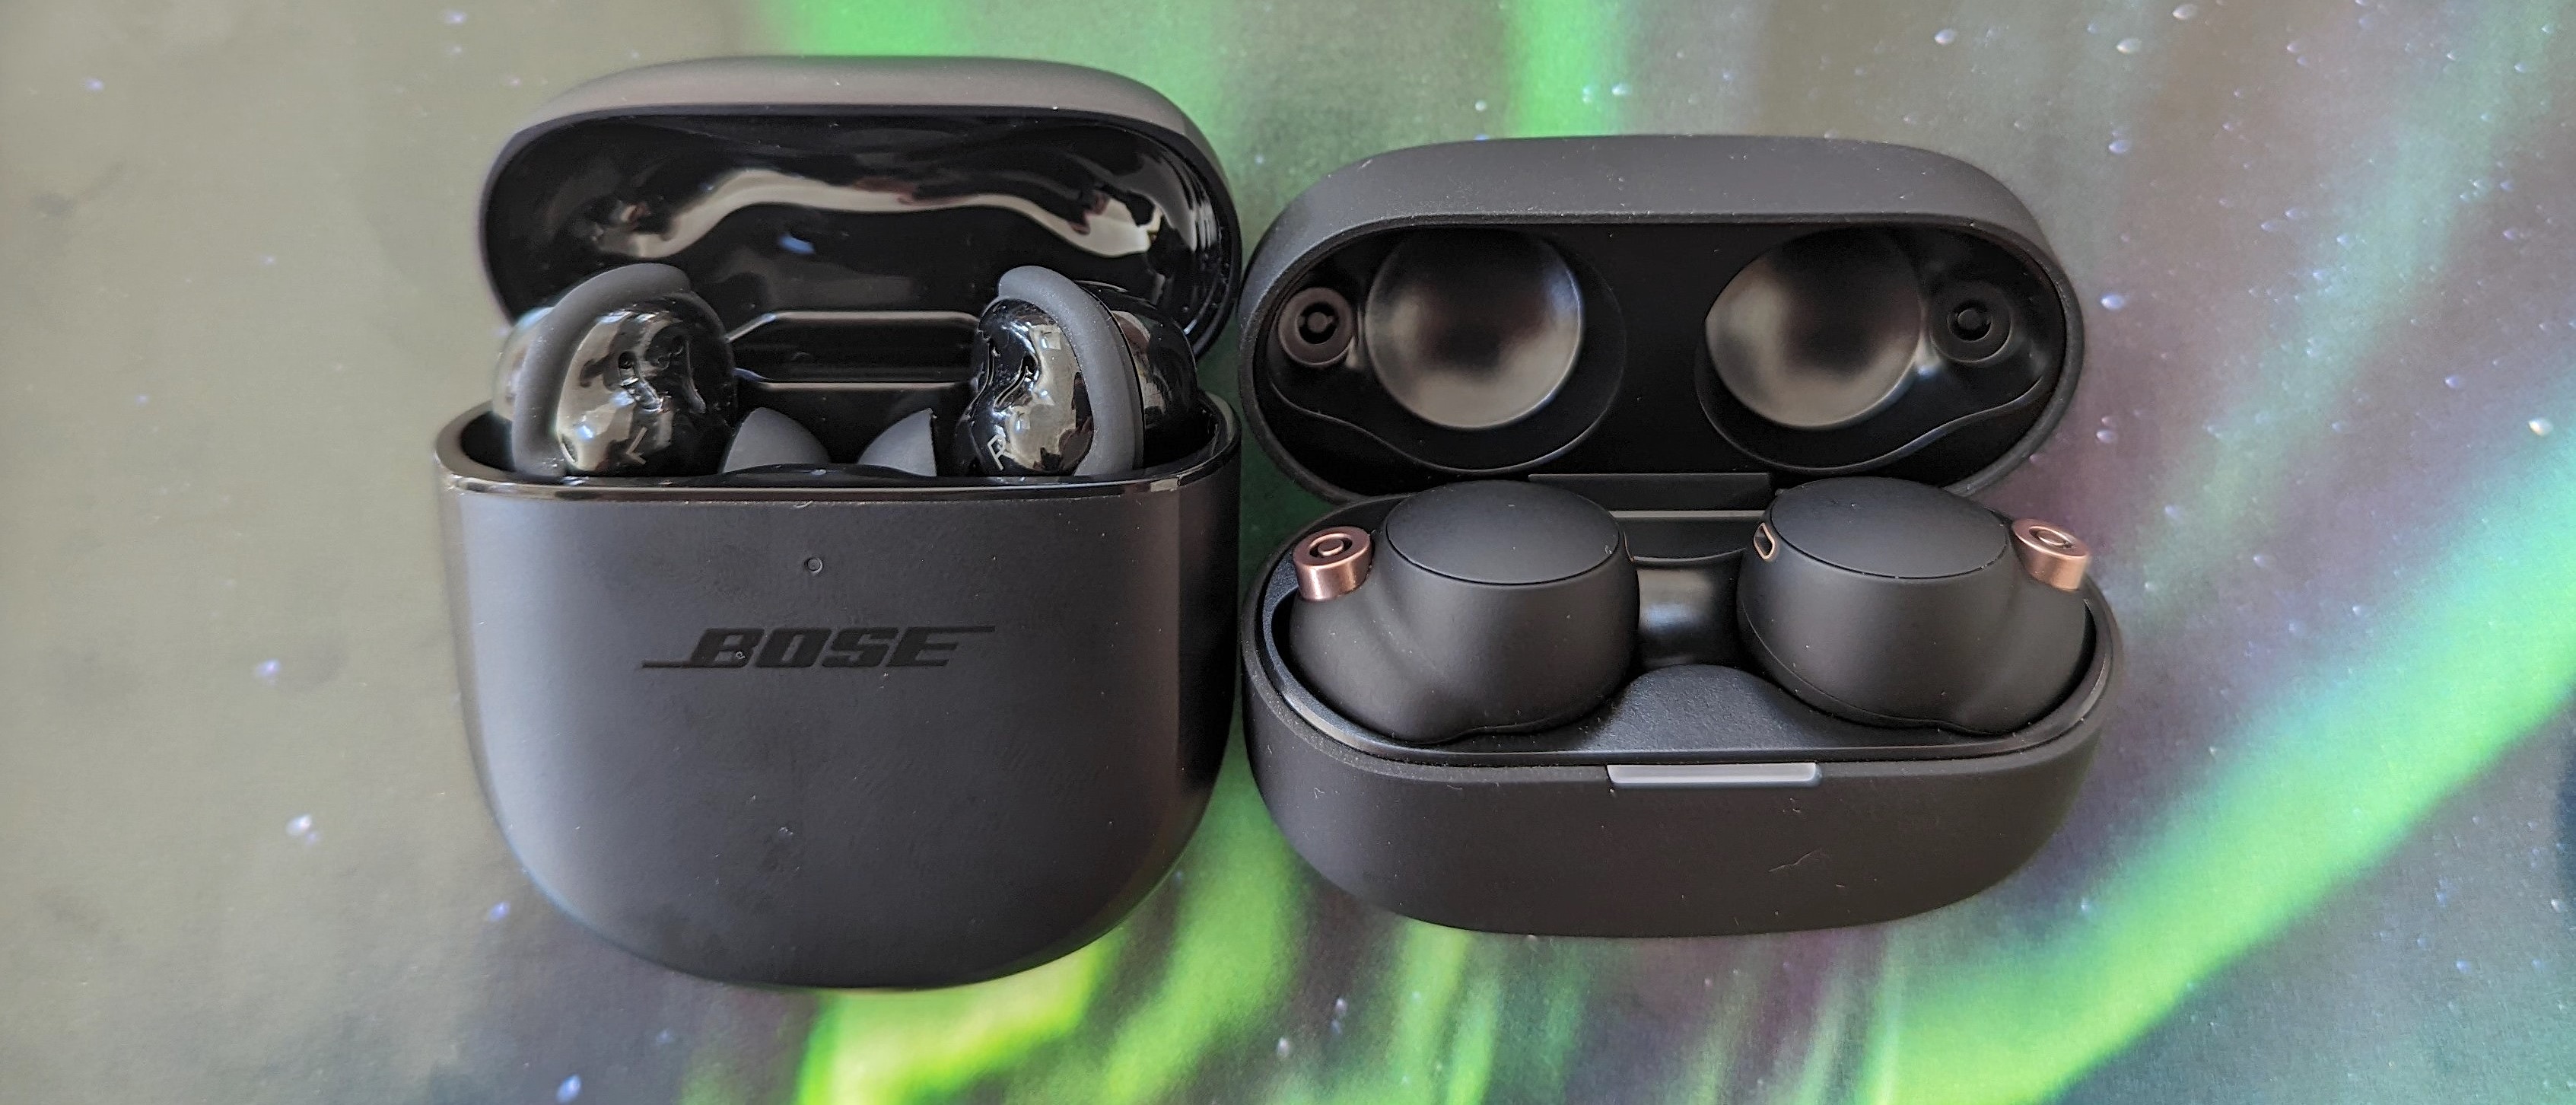 Bose QuietComfort Earbuds Vs Sony WF XM Which Are The Better Noise Cancelling Earbuds